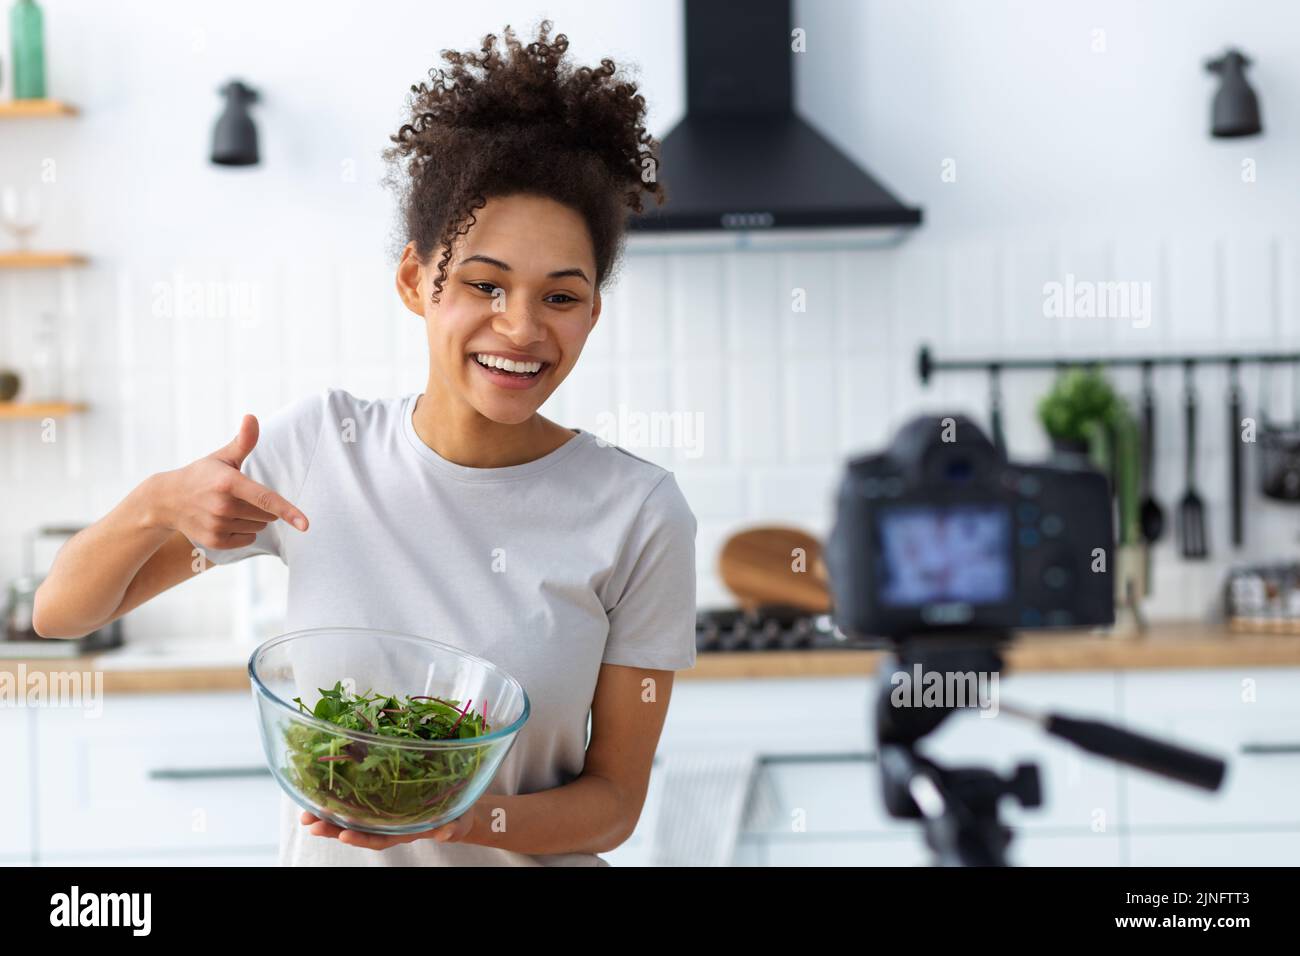 Healthy diet eating Smiling woman food blogger cooking healthy food in home kitchen Healthy lifestyle Stock Photo